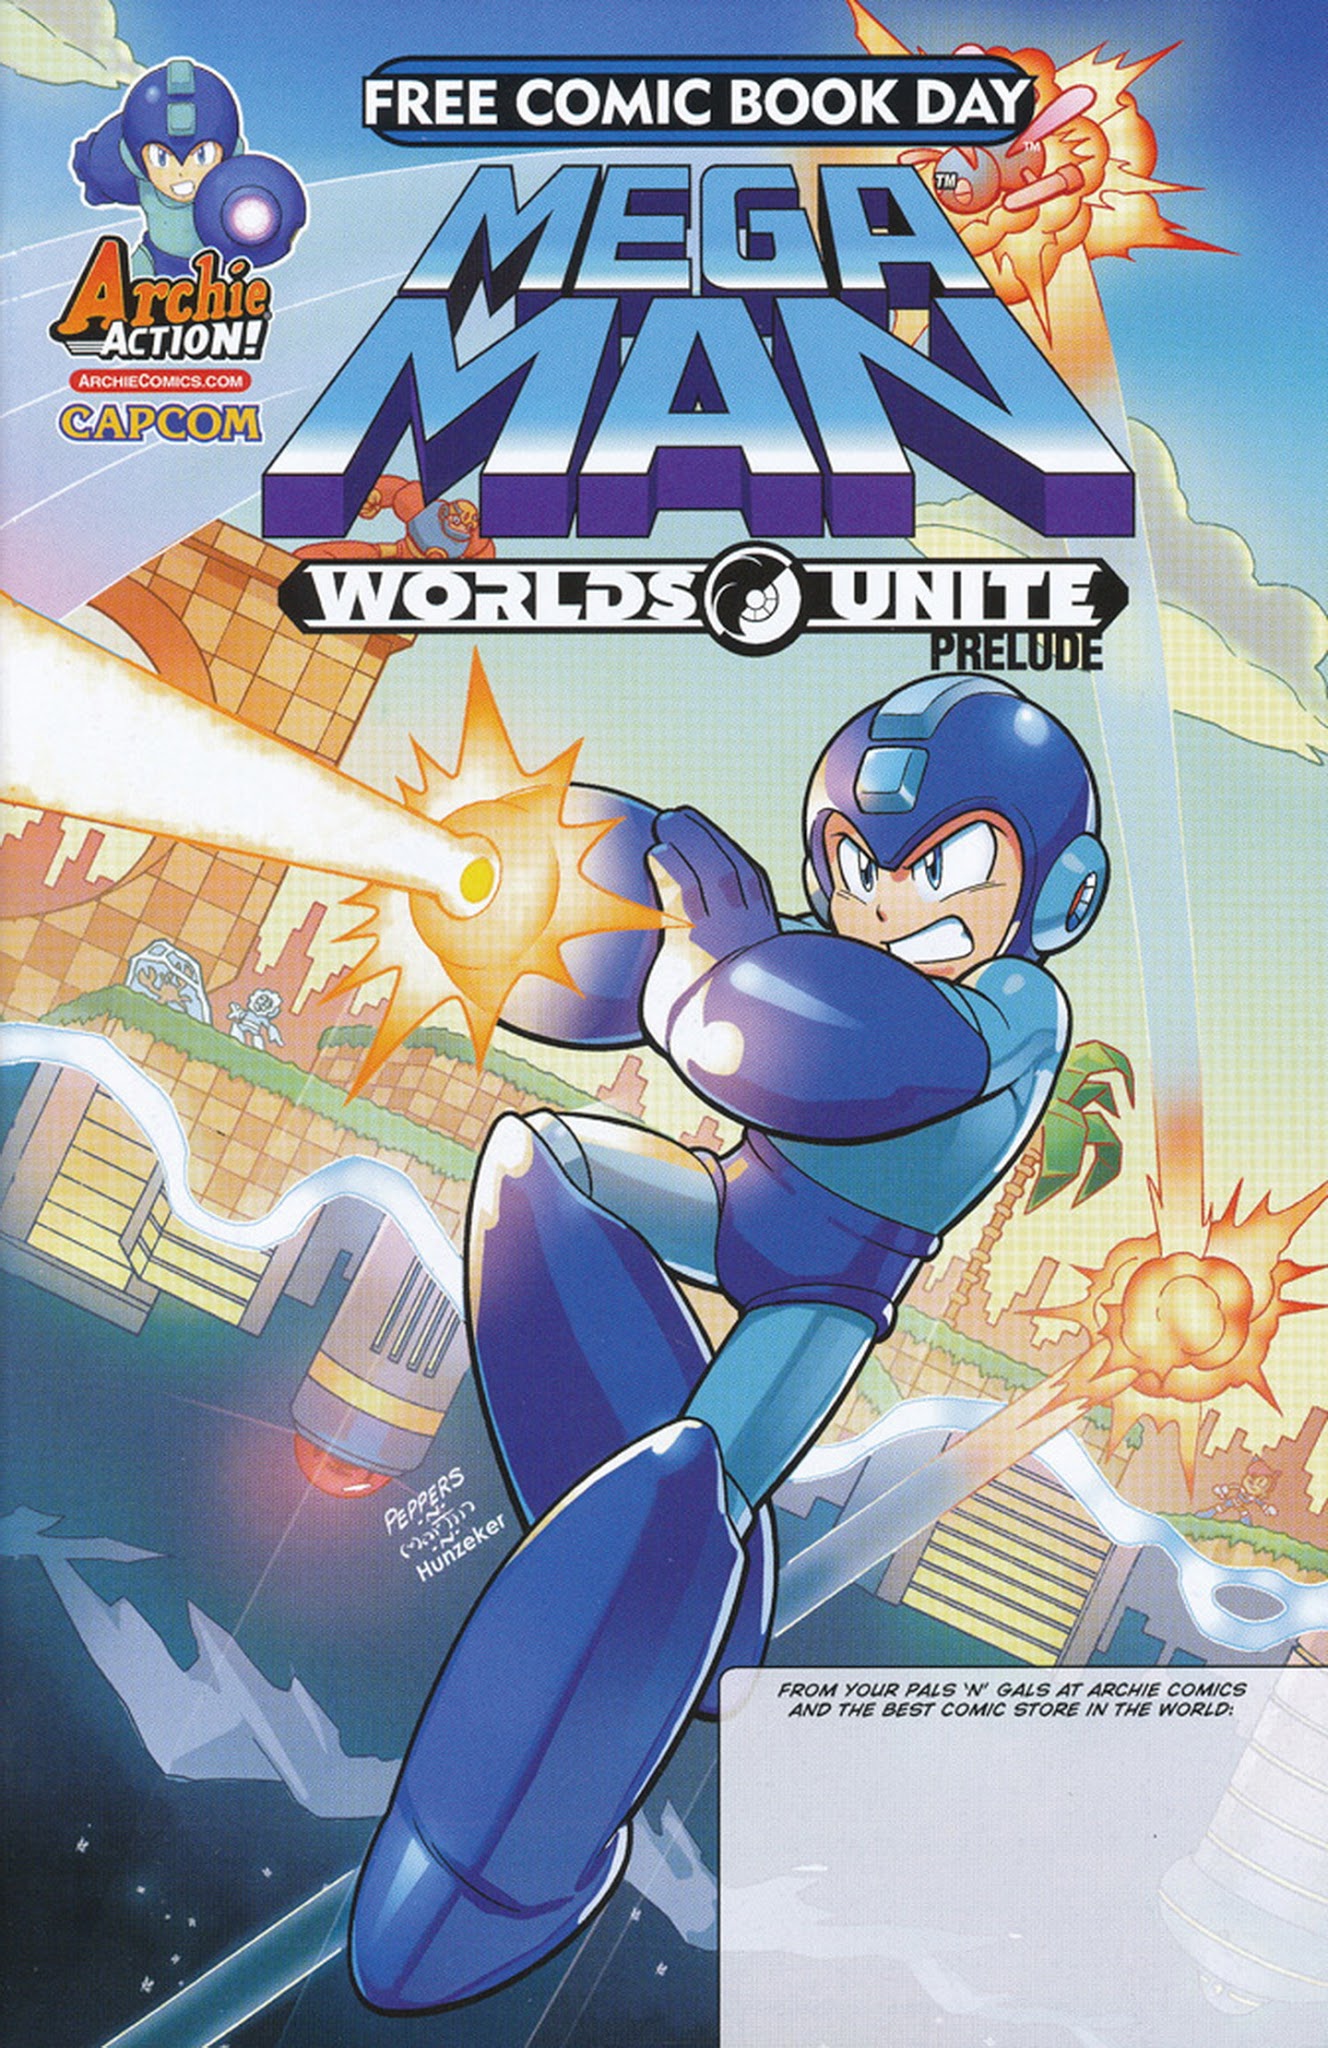 Read online Free Comic Book Day 2015 comic -  Issue # Sonic the Hedgehog - Mega Man Worlds Unite Prelude - 2